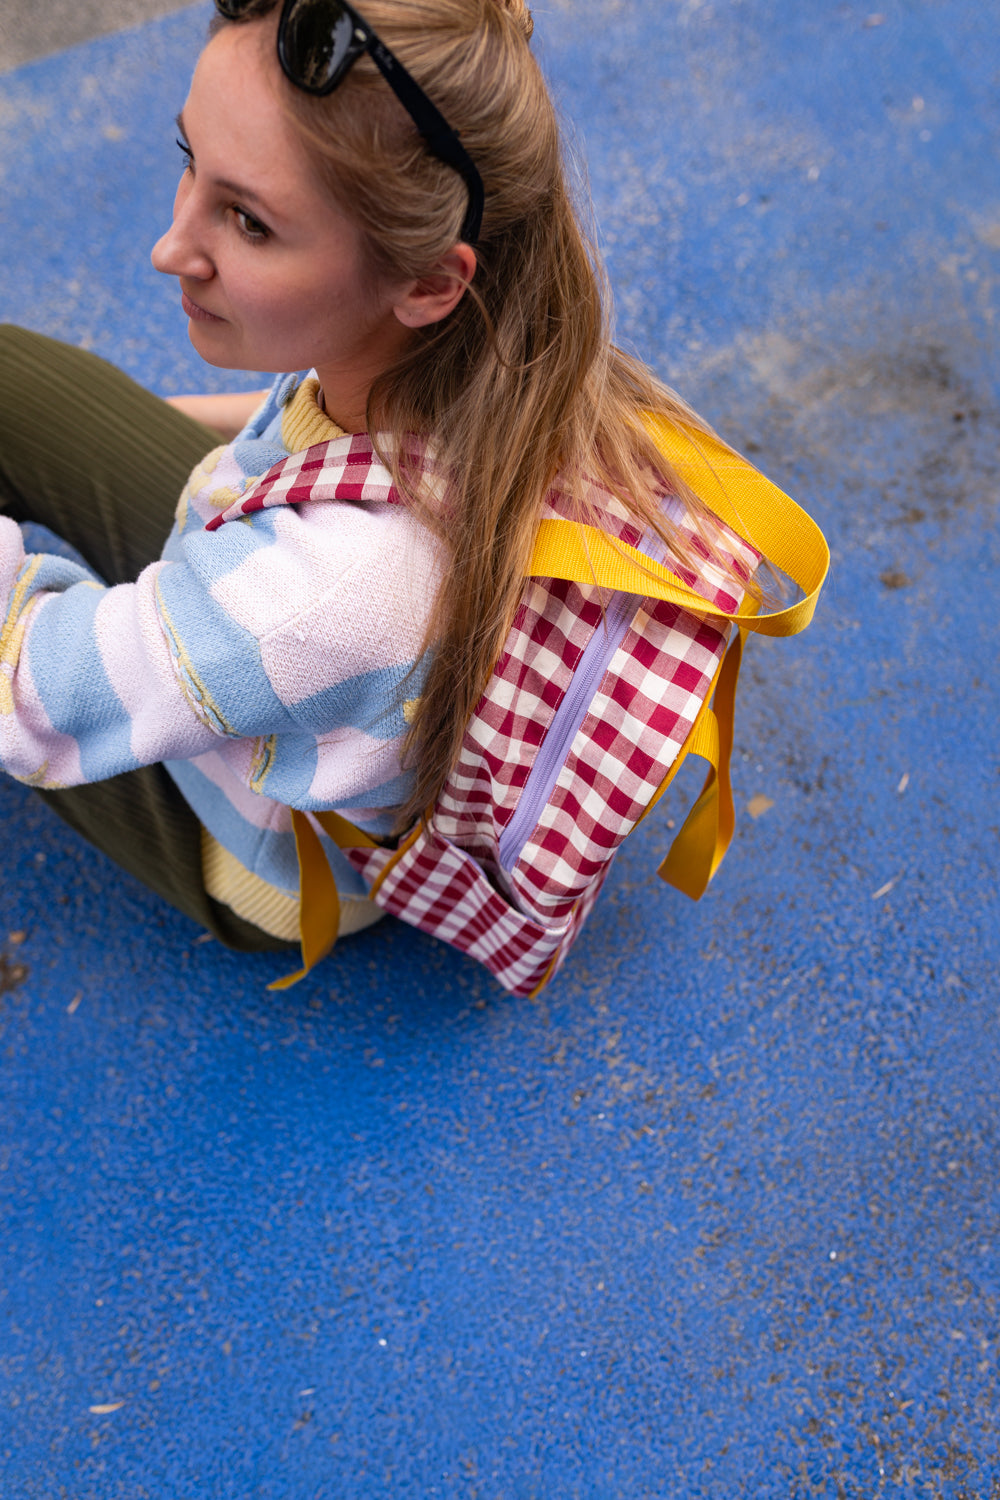 woman sitting on blue floor with red gingham backpack by bettys home. checkered backpack 